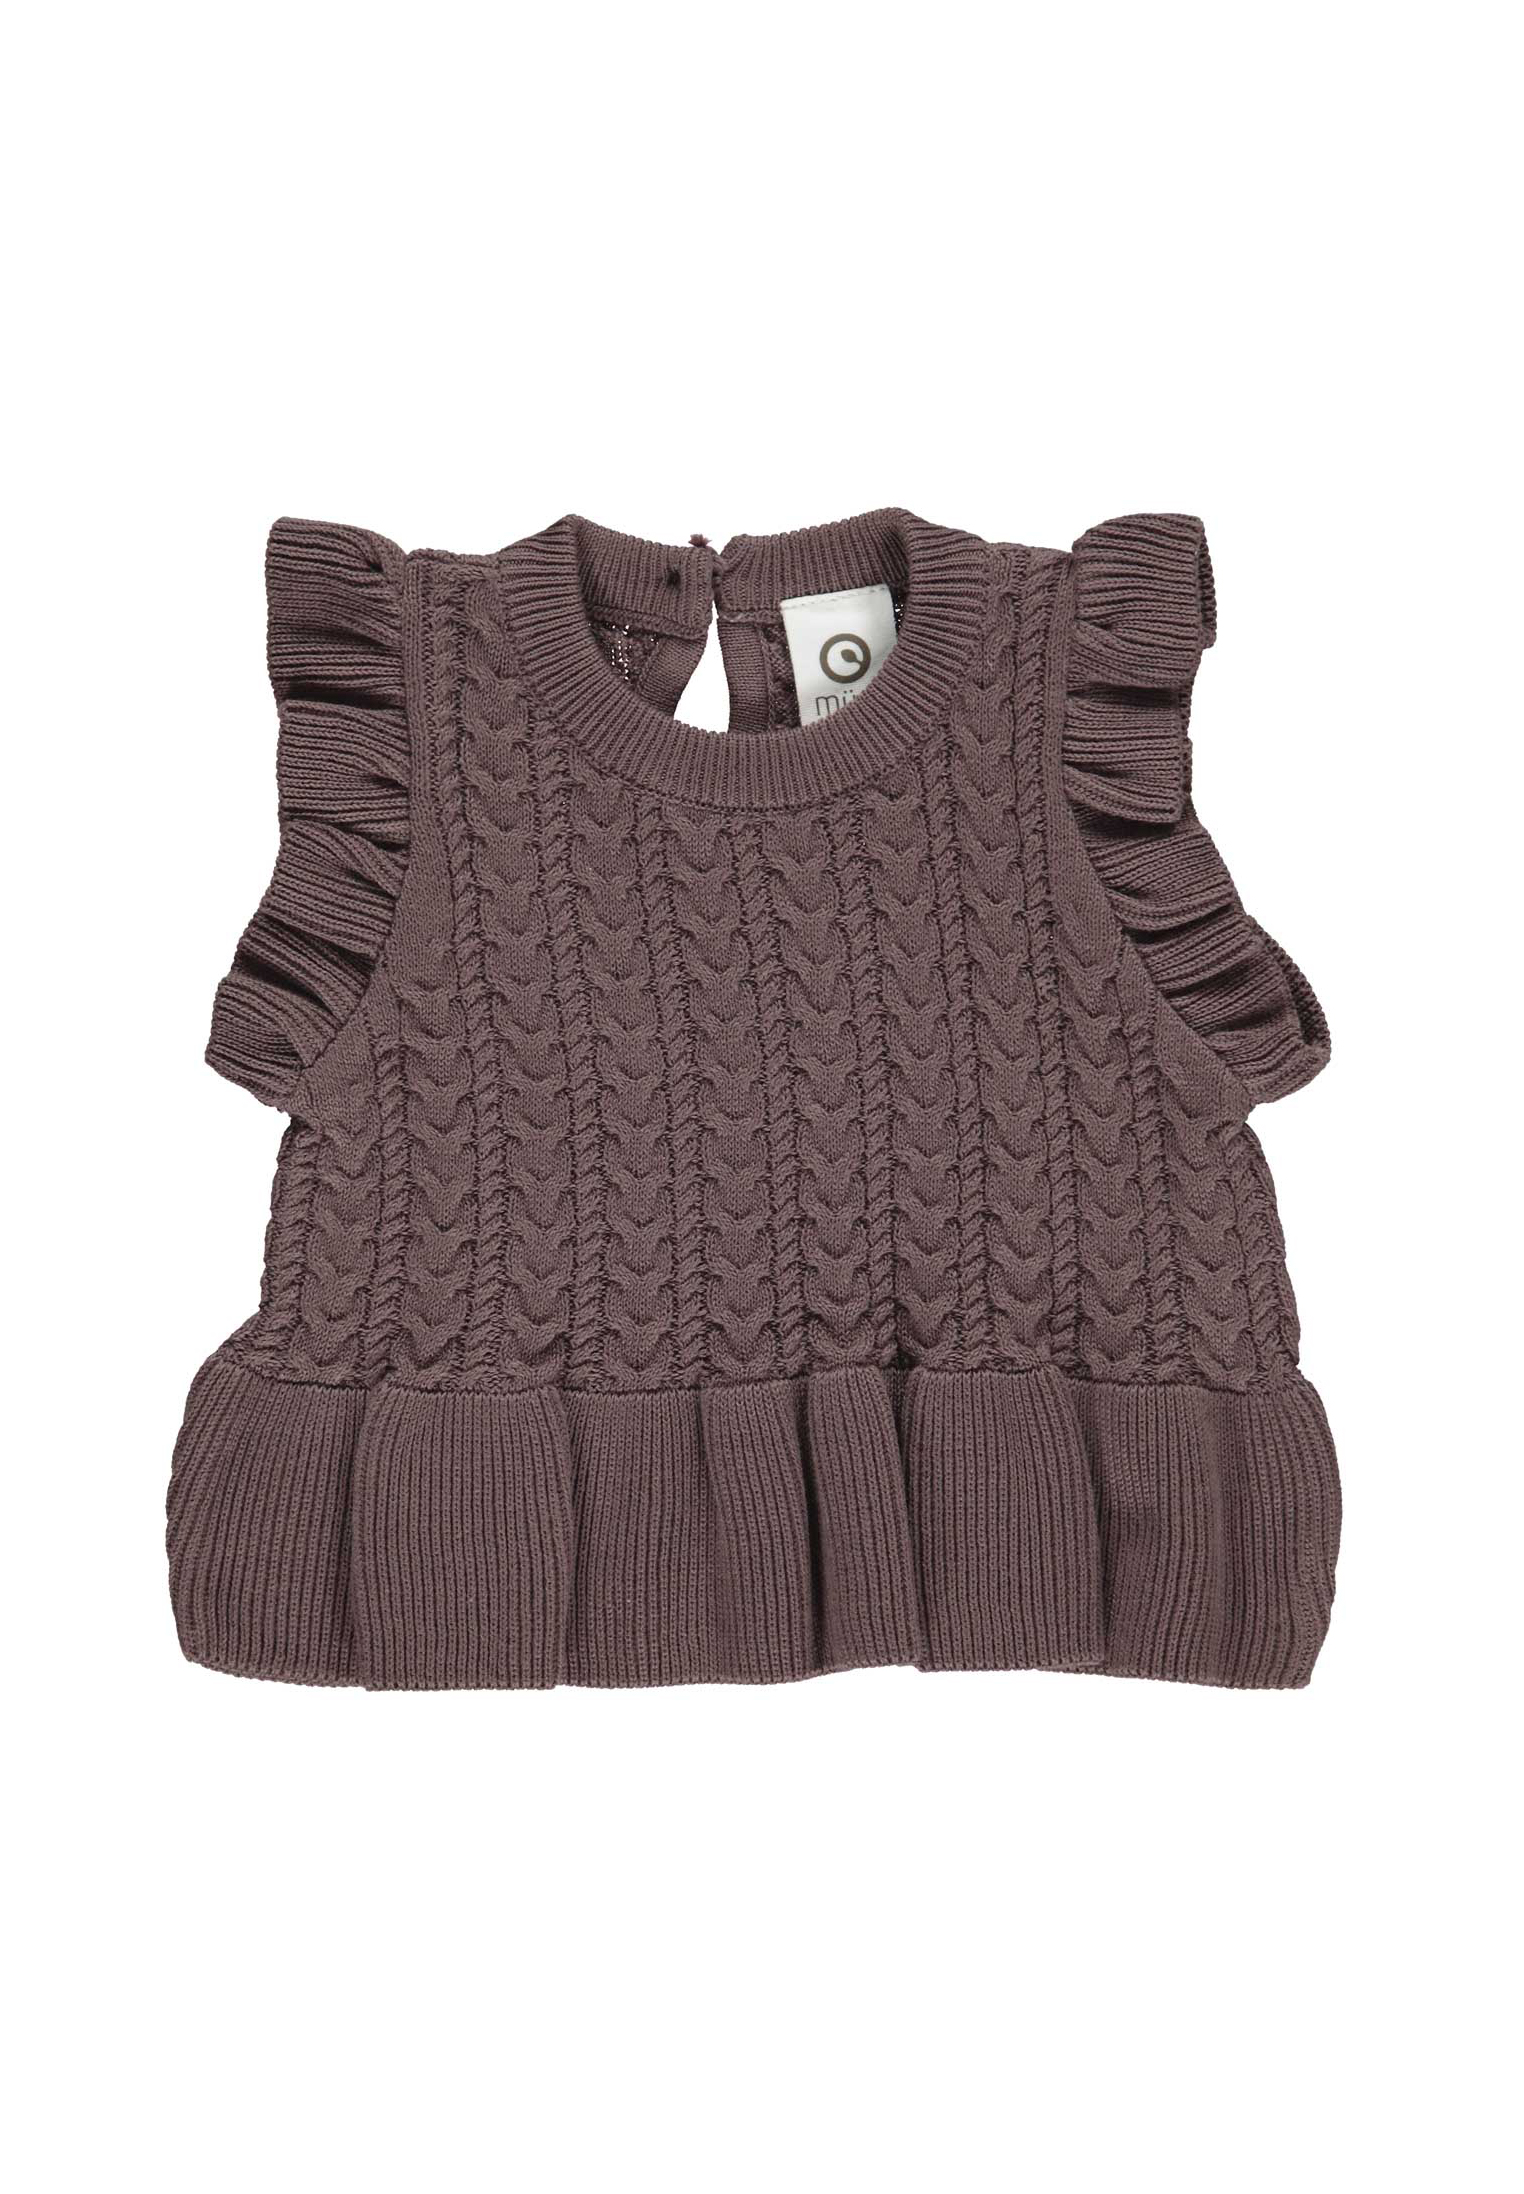 MAMA.LICIOUS Knitted baby-vest -Grape - 1545000400